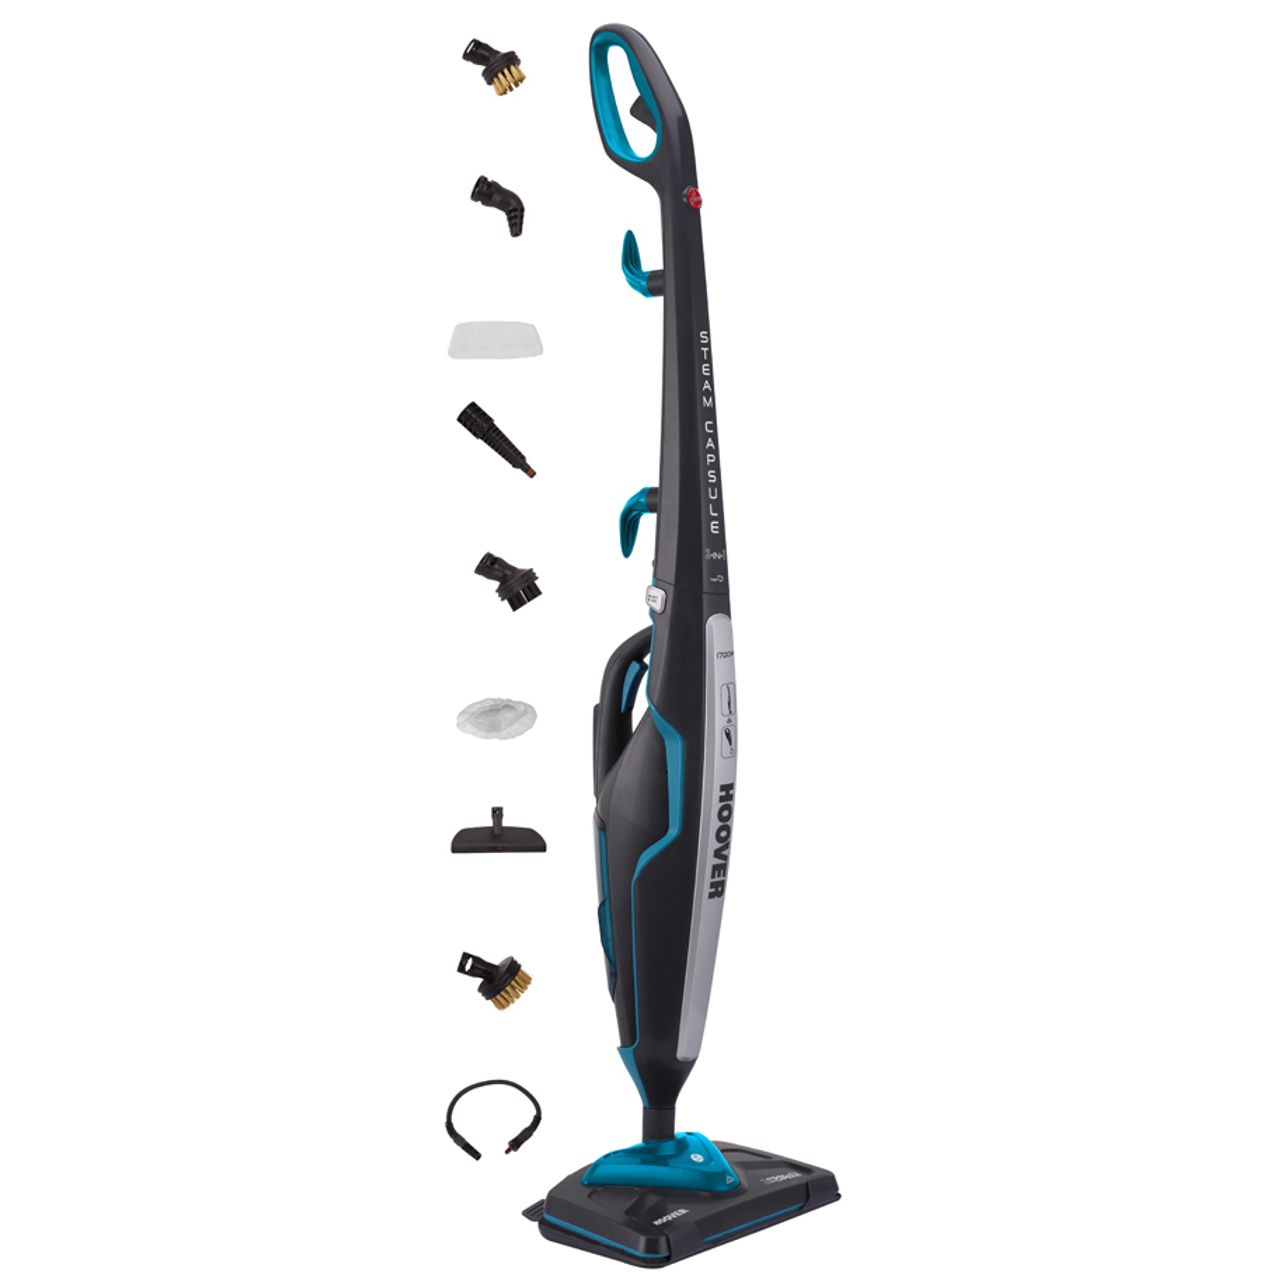 Hoover CA2IN1D Steam Cleaner Review